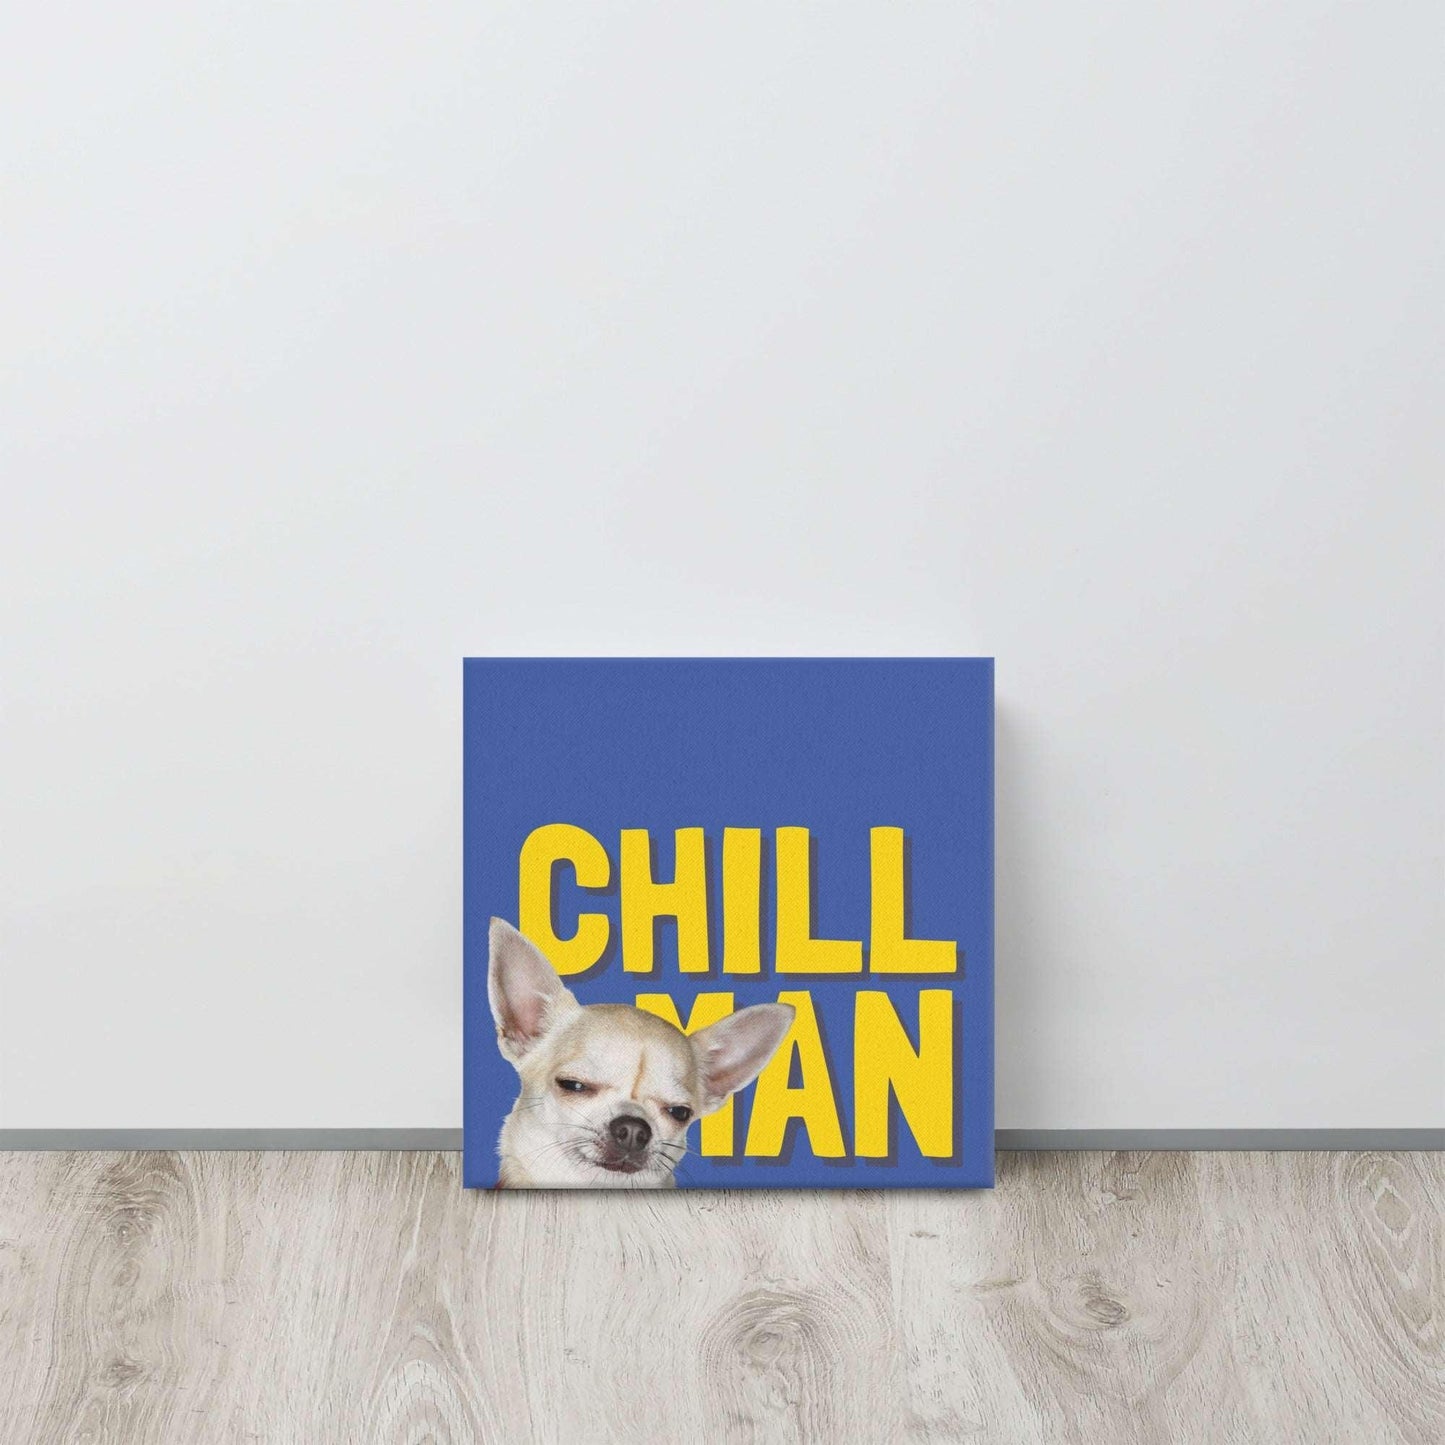 CHILL MAN - one of the famous Chimigos chihuahua memes.  This is a vivid and fade resistant art print on a stretched canvas. A super chill chi has just two words of advice for you: CHILL MAN. The perfect gift for anyone who needs to lighten up! Bright colours - blue and yellow.